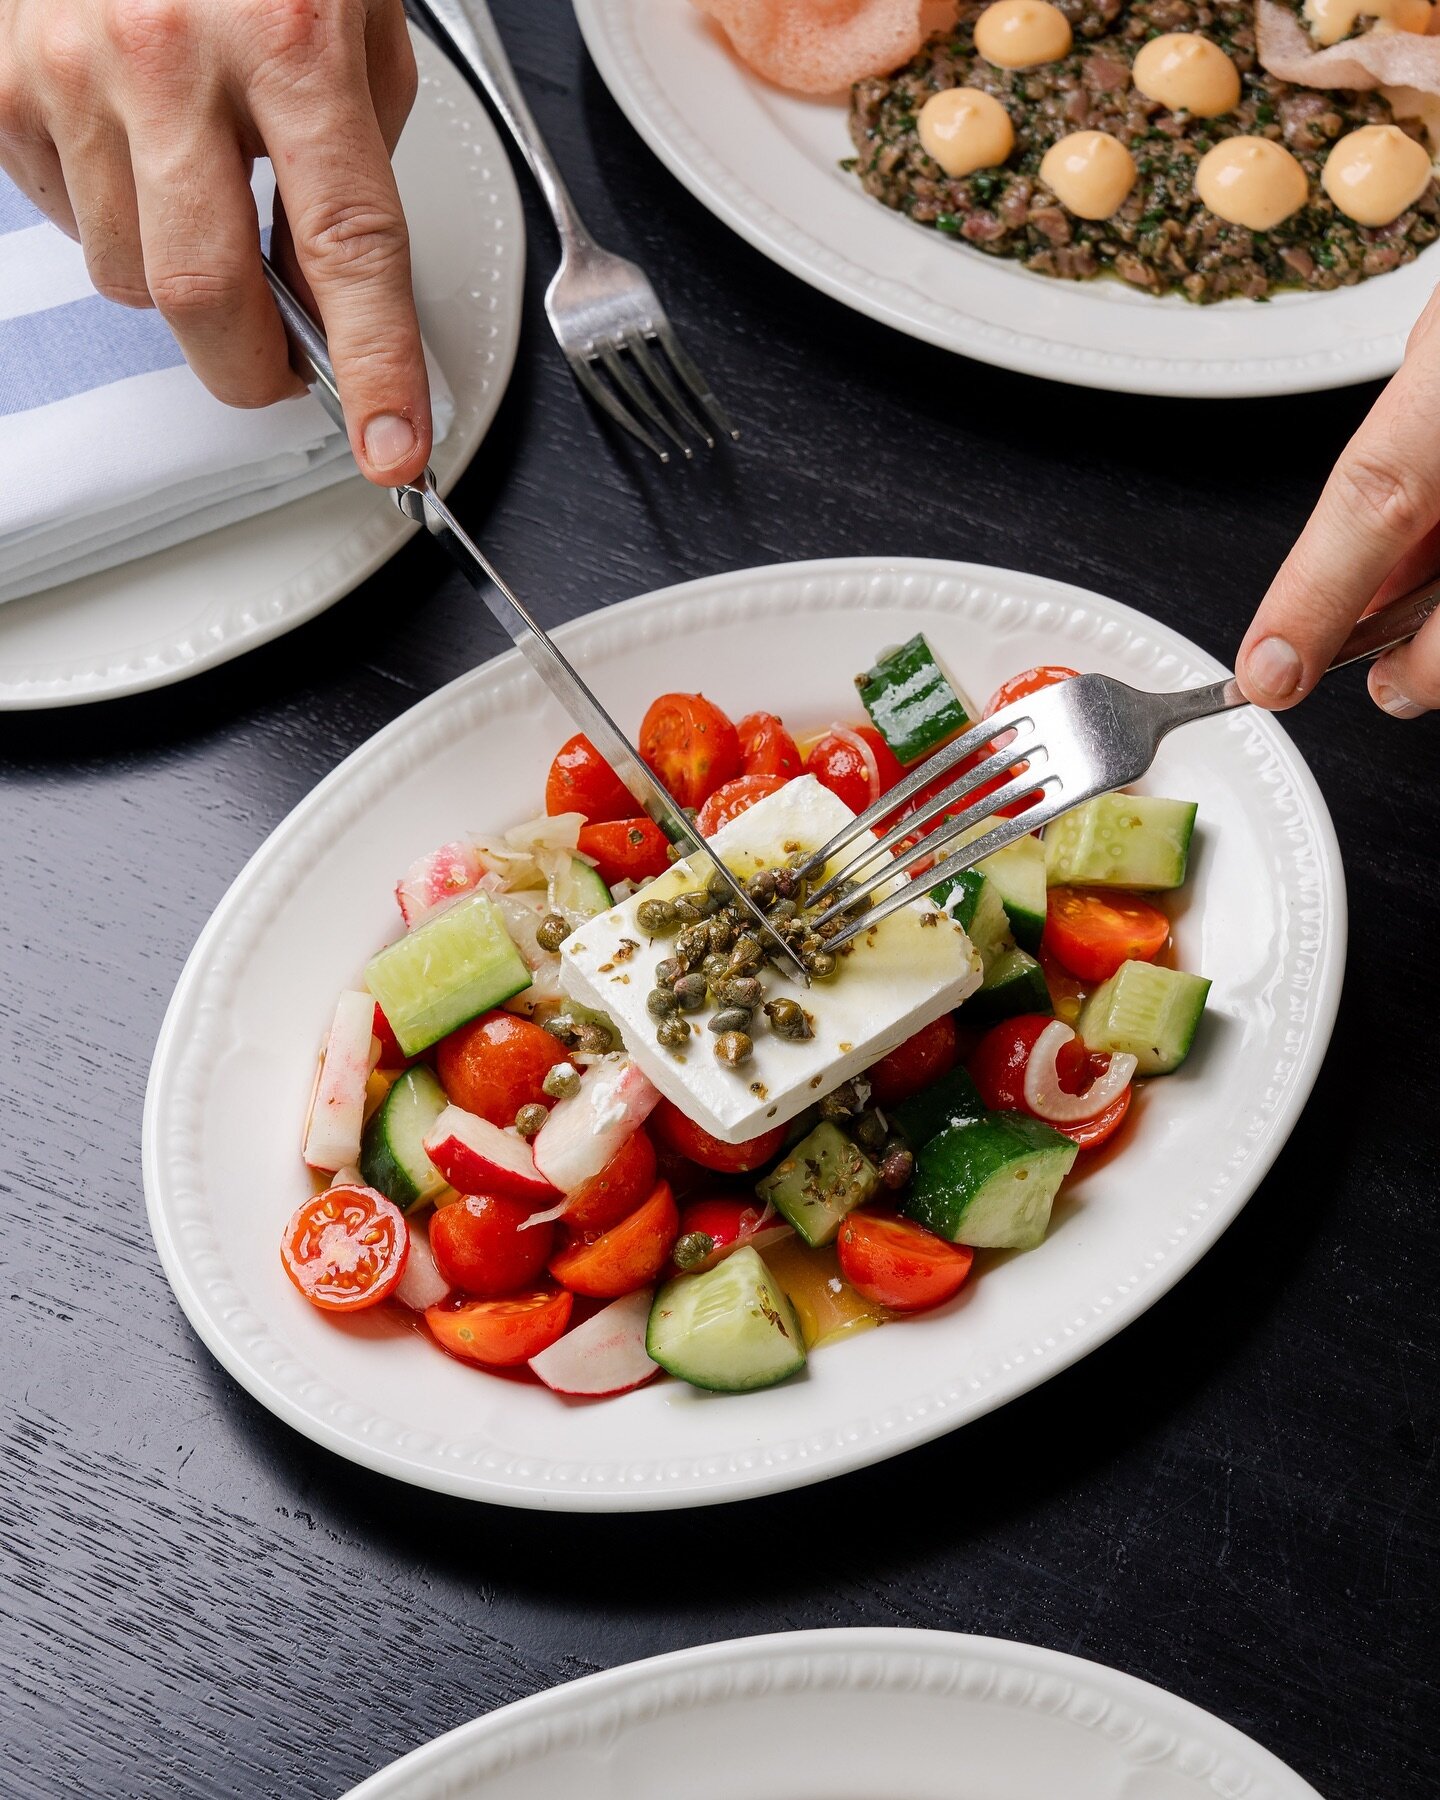 Bursting with Mediterranean flavours, our Greek salad is not one to miss 🍅

www.foshportside.com.au/bookings for reservations or call us on (07) 3211 8111
Portside Wharf 3.01/39 Hercules Street, Hamilton
⁠
#thisisbrisbane #Portside #Fosh #seafood #P